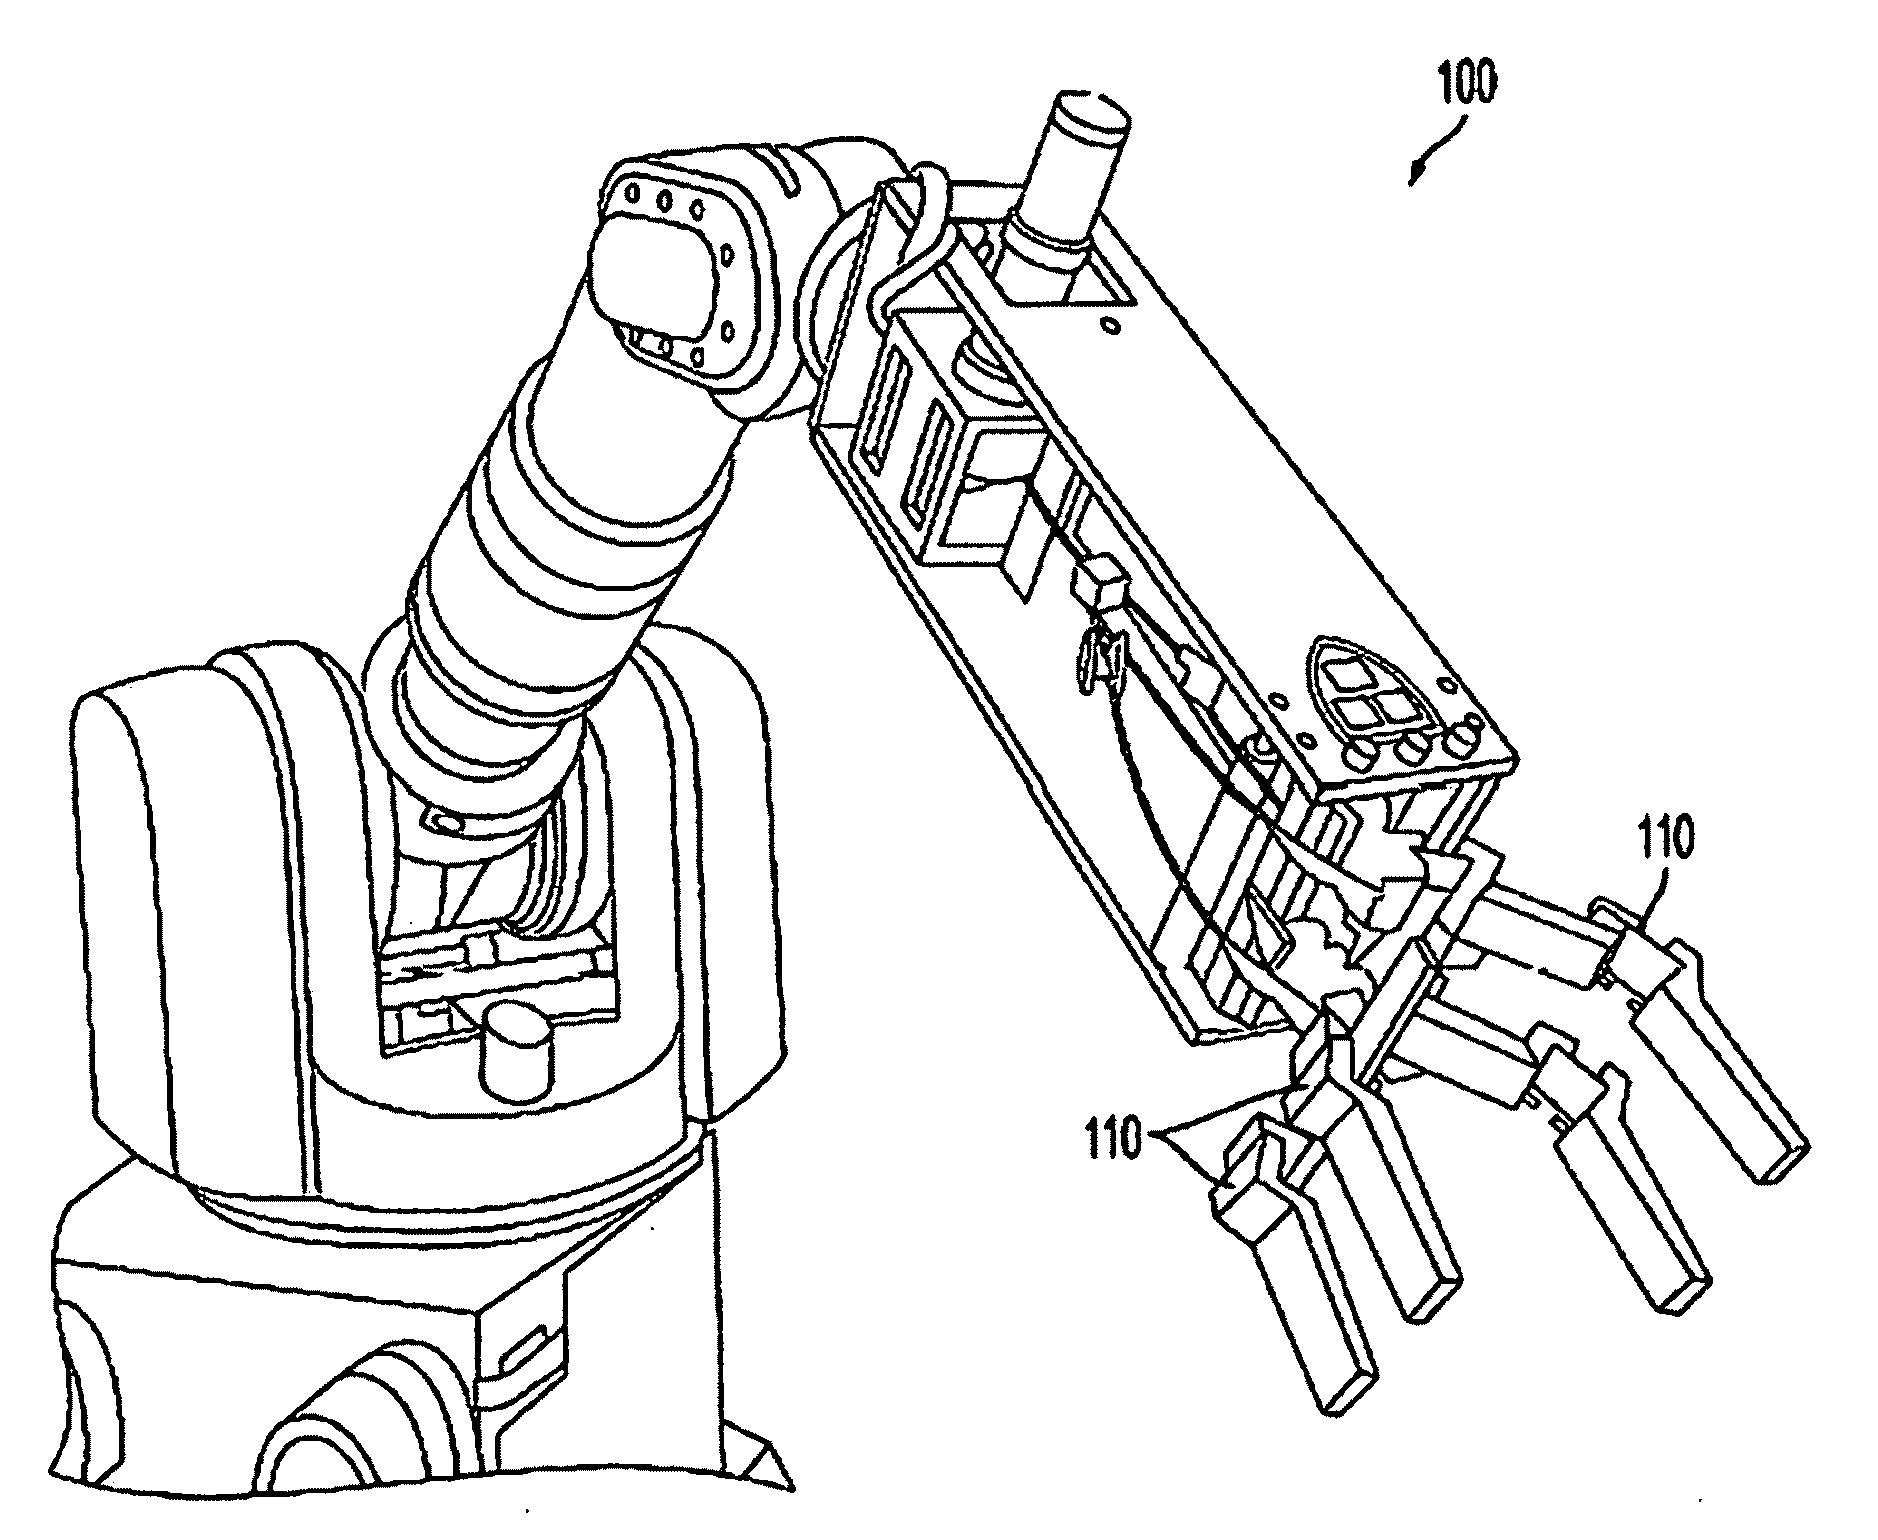 Robust Compliant Adaptive Grasper and Method of Manufacturing Same